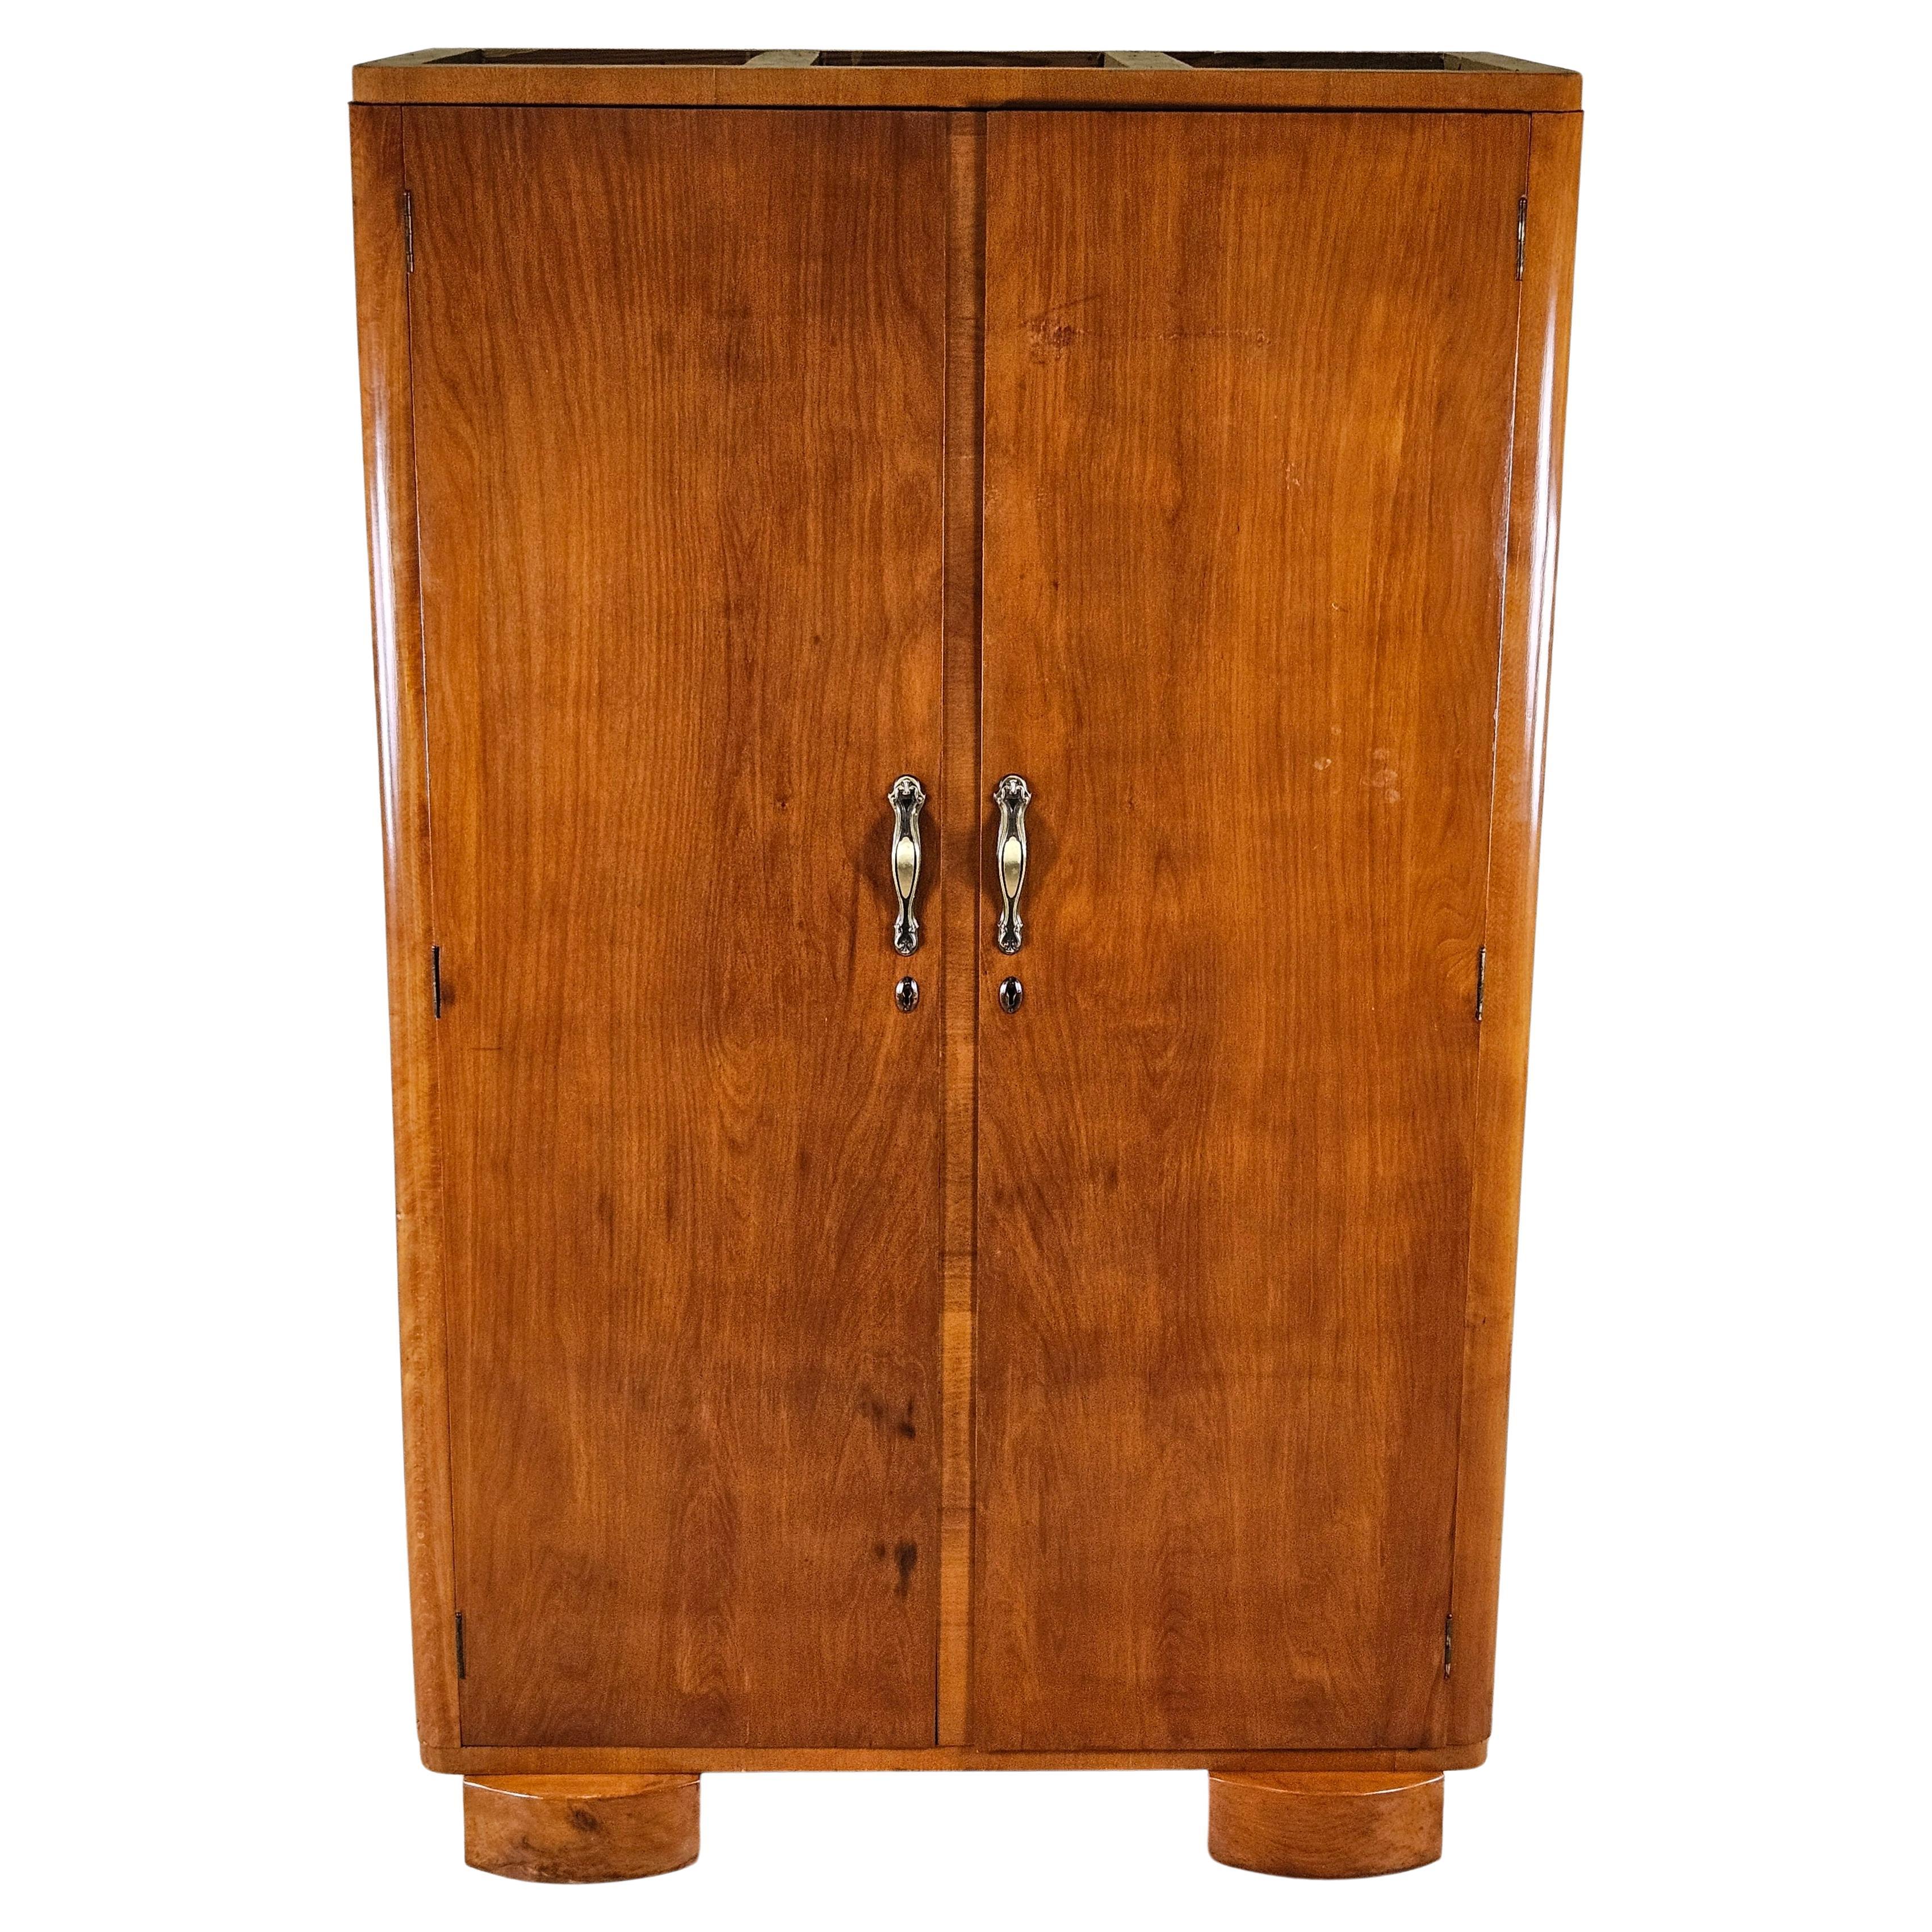 Two-door walnut closet with brass handles 20th century For Sale